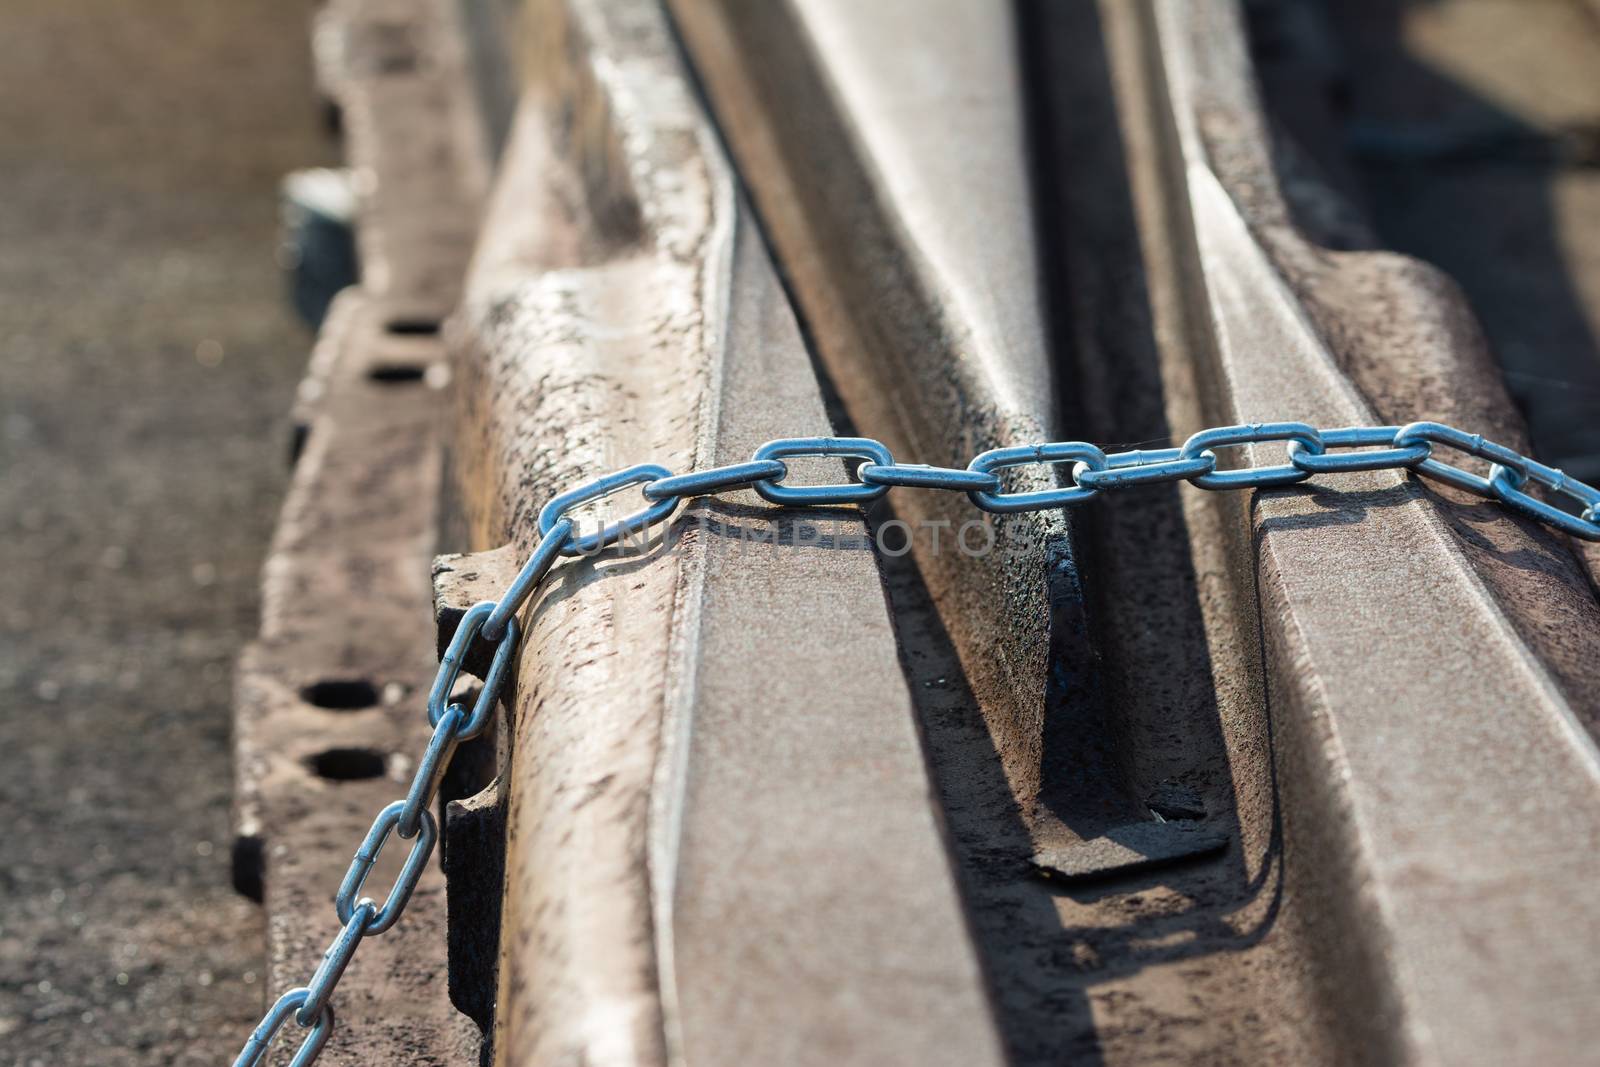 Rusty Train Tracks and Chain by justtscott